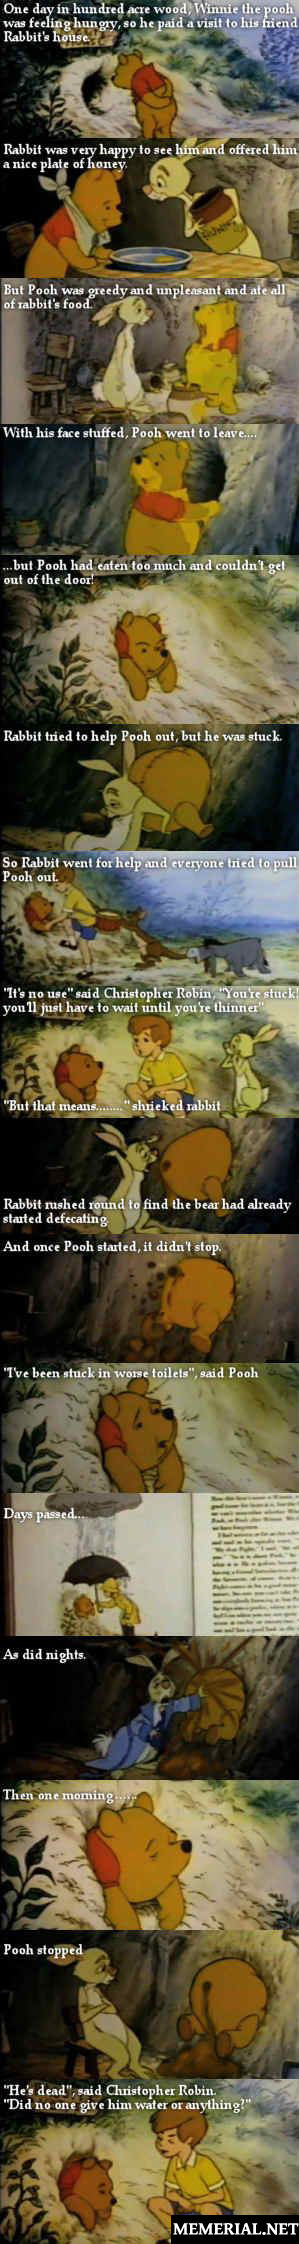 One day in hundred acre wood, Winnie the pooh was feeling hungry, so he paid a visit to his friend Rabbit's house. Rabbit was very happy to see him and offered him a nice plate of honey.